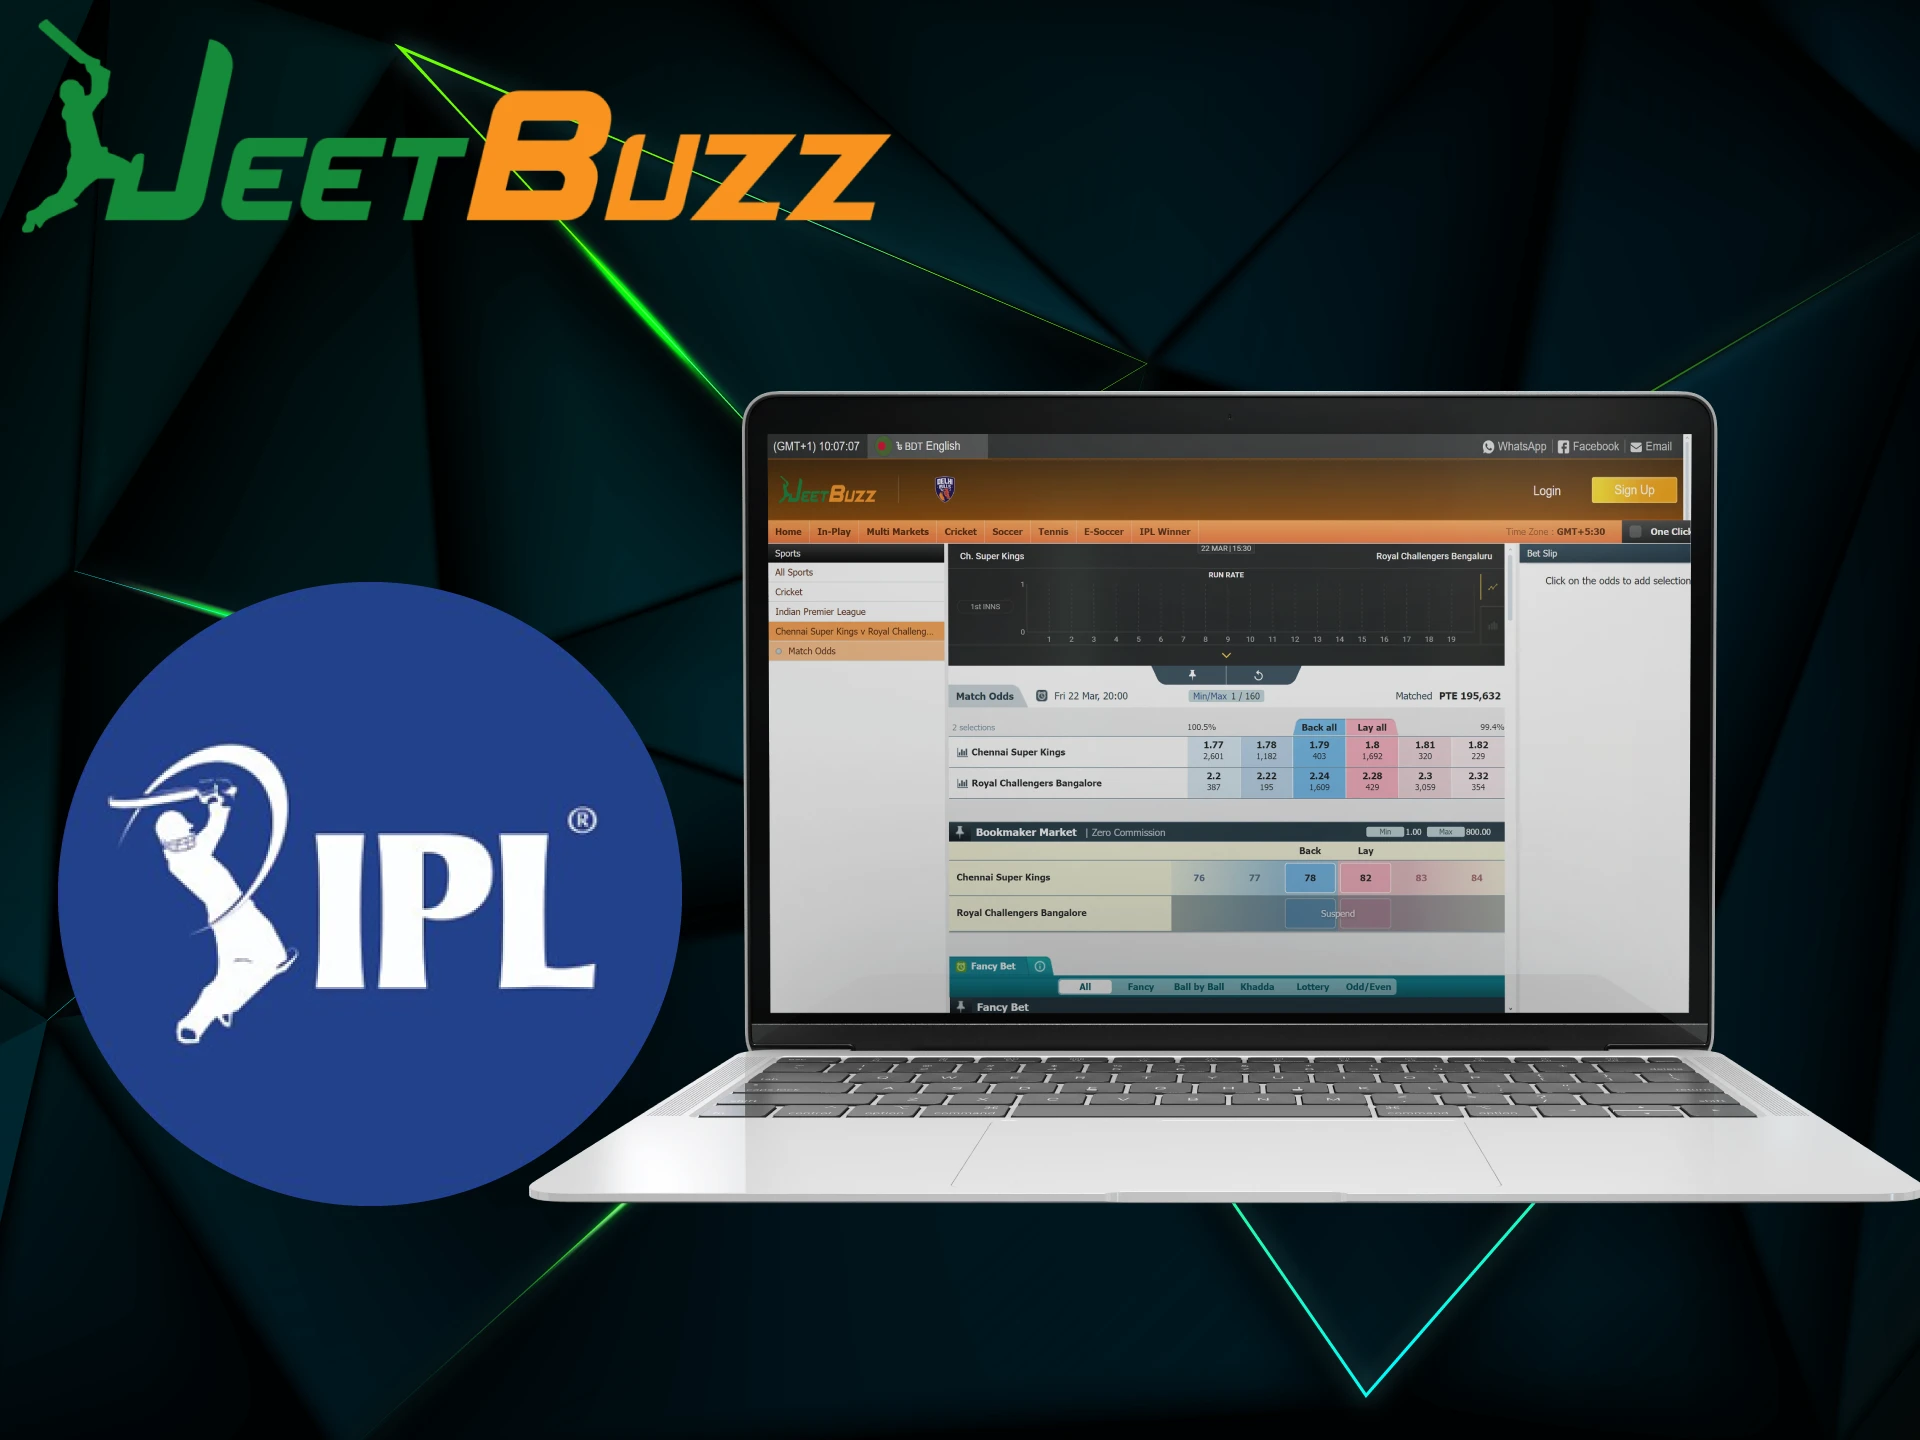 To bet on IPL at JeetBuzz log into your account and make a deposit.